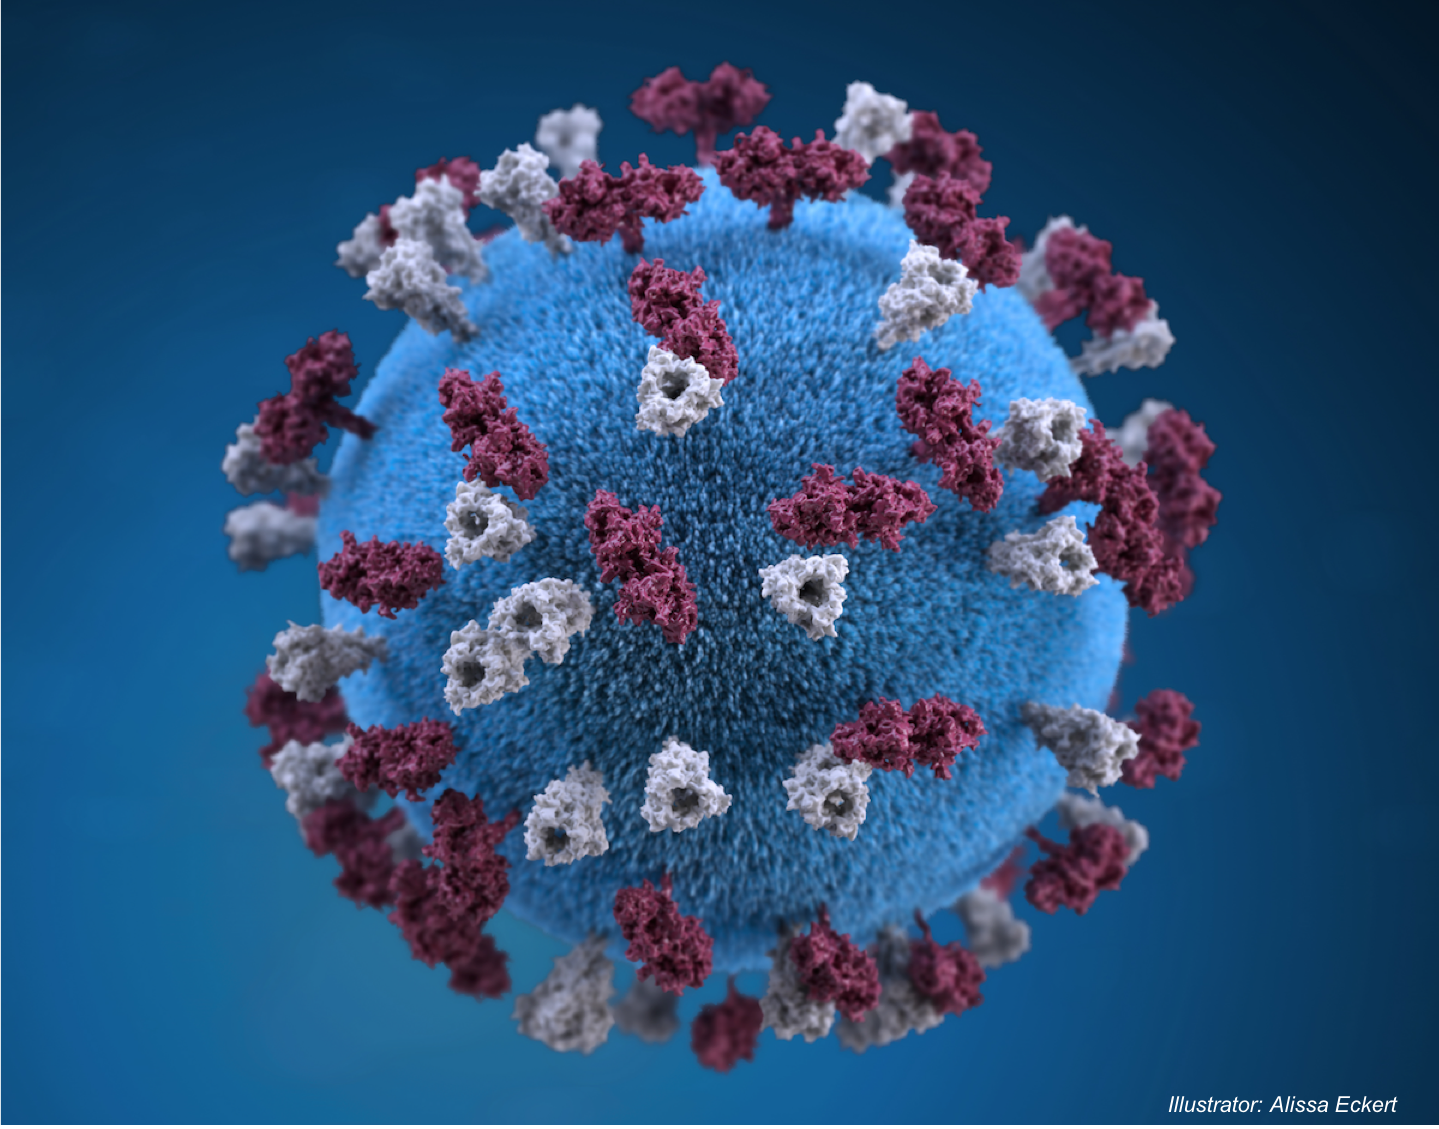 Measles Outbreak and Malicious Actors in Europe: Public Health Watch